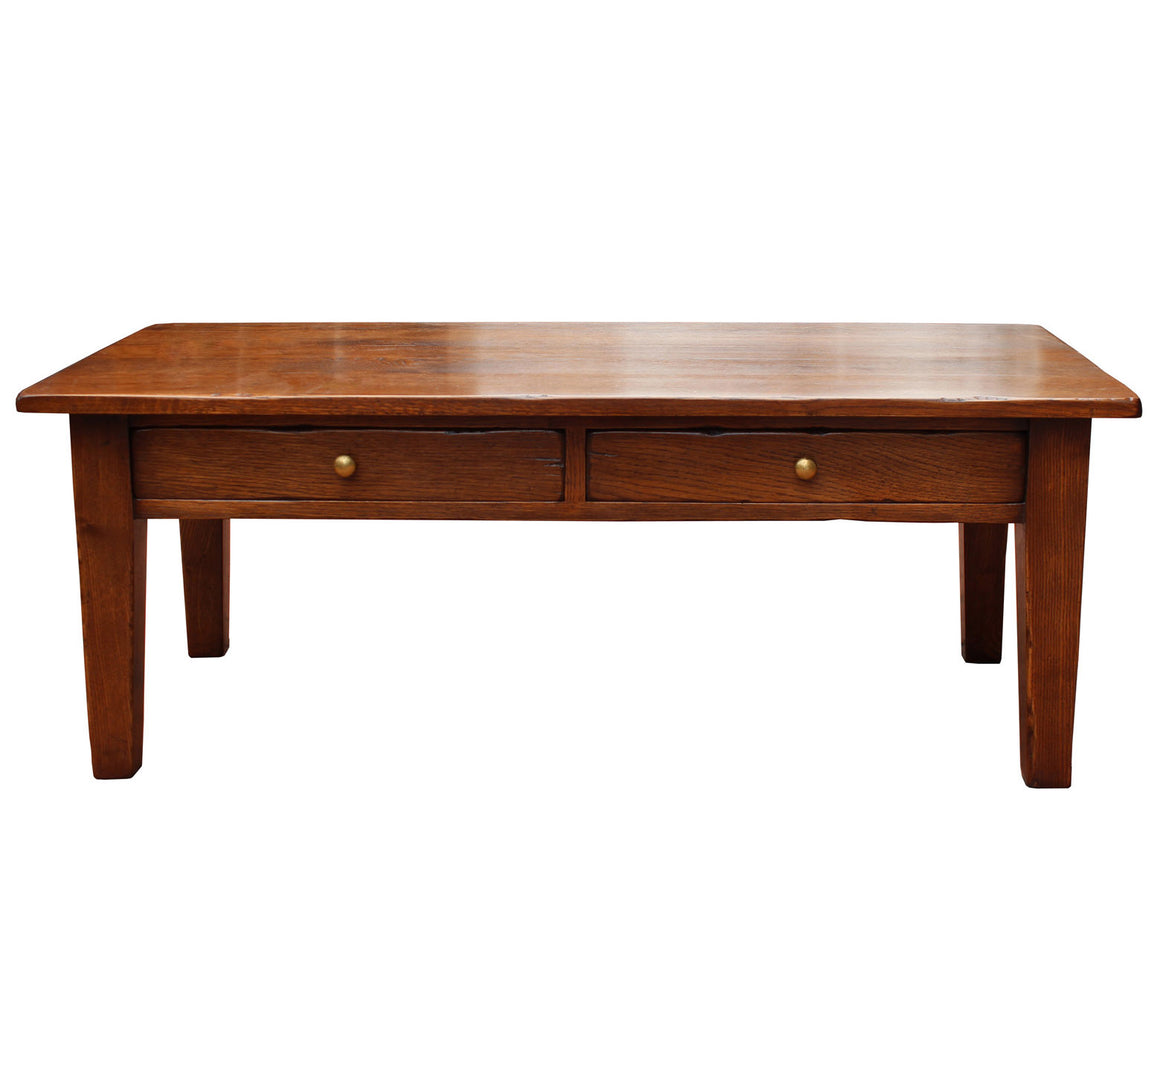 Guildford Solid Oak Coffee Table with Drawers